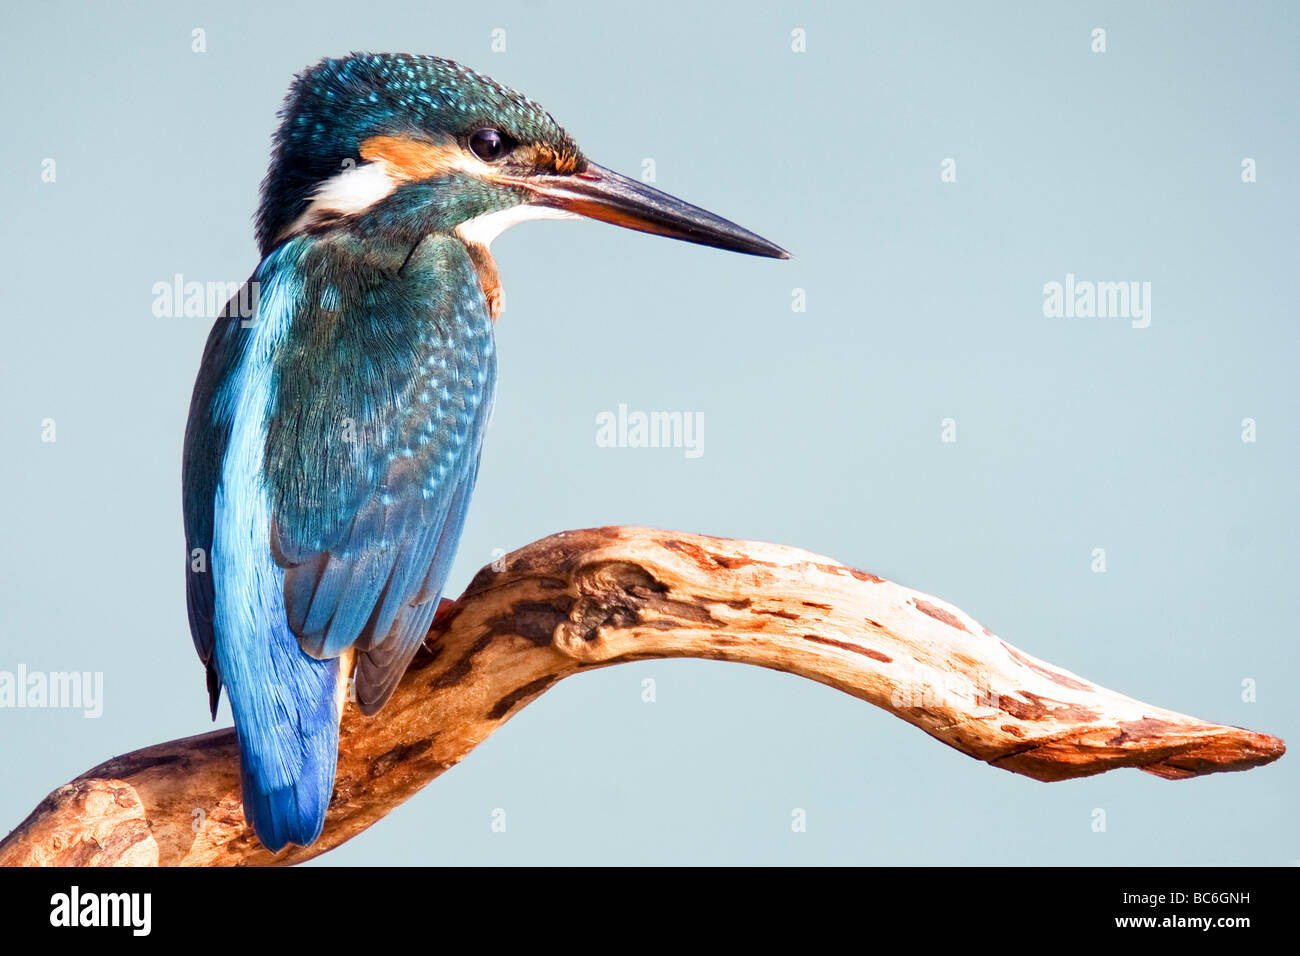 [Alcedo atthis Kingfisher commun] Banque D'Images